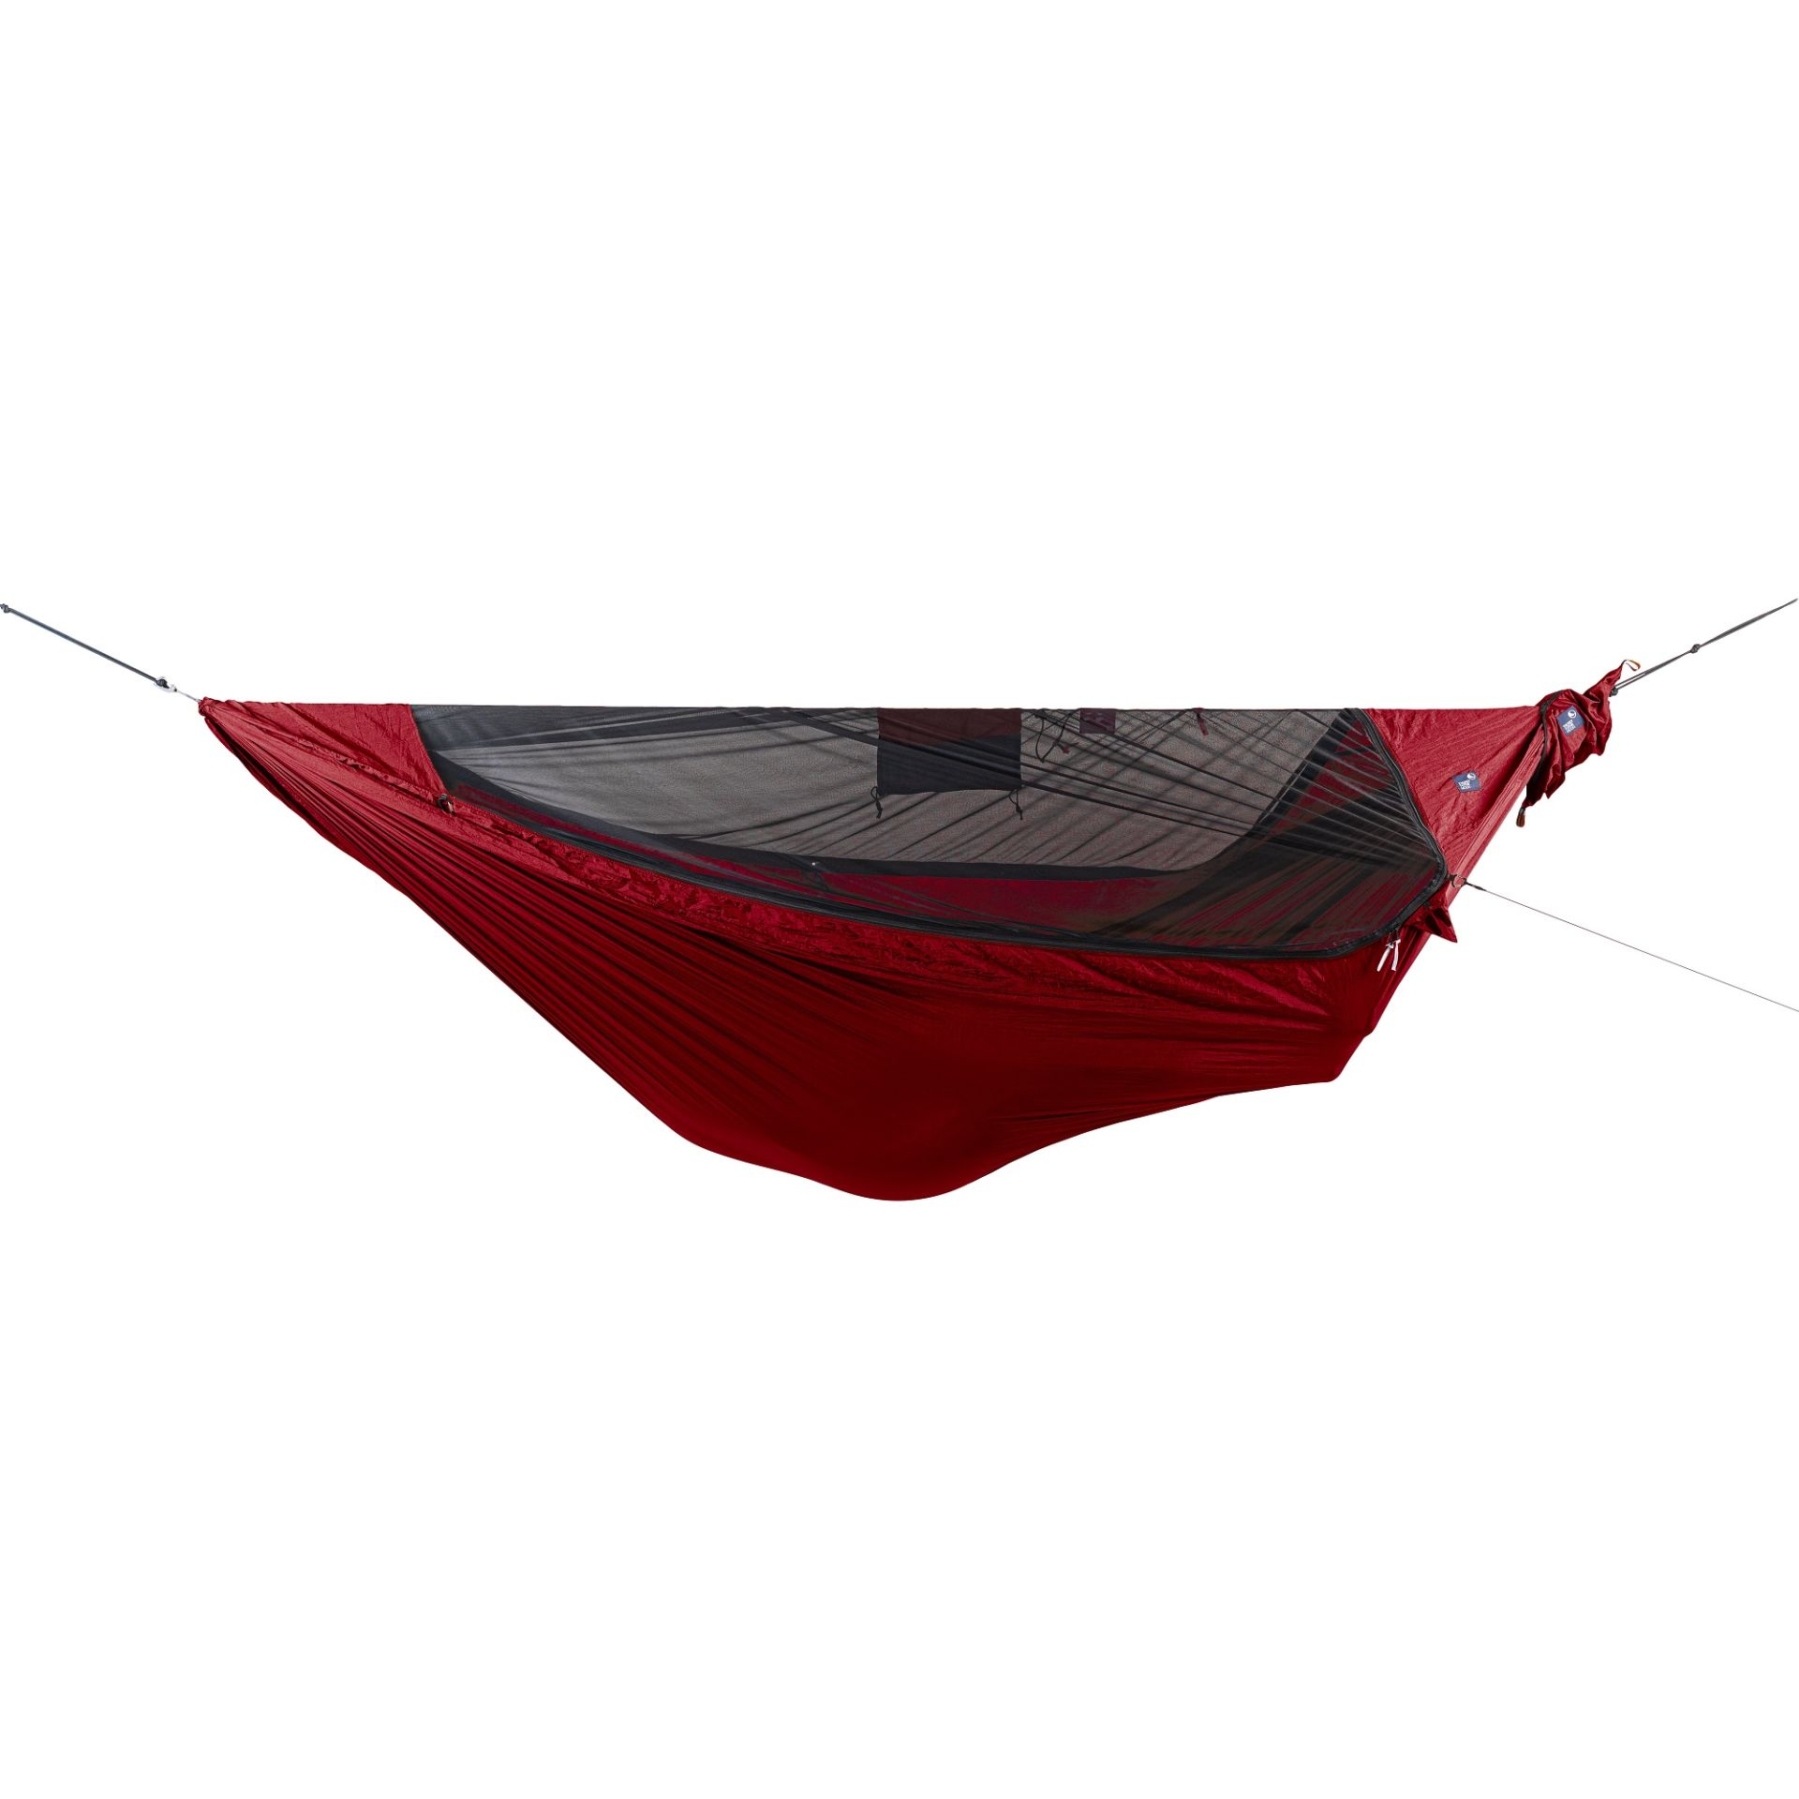 Picture of Ticket To The Moon Pro Hammock - Burgundy / Black